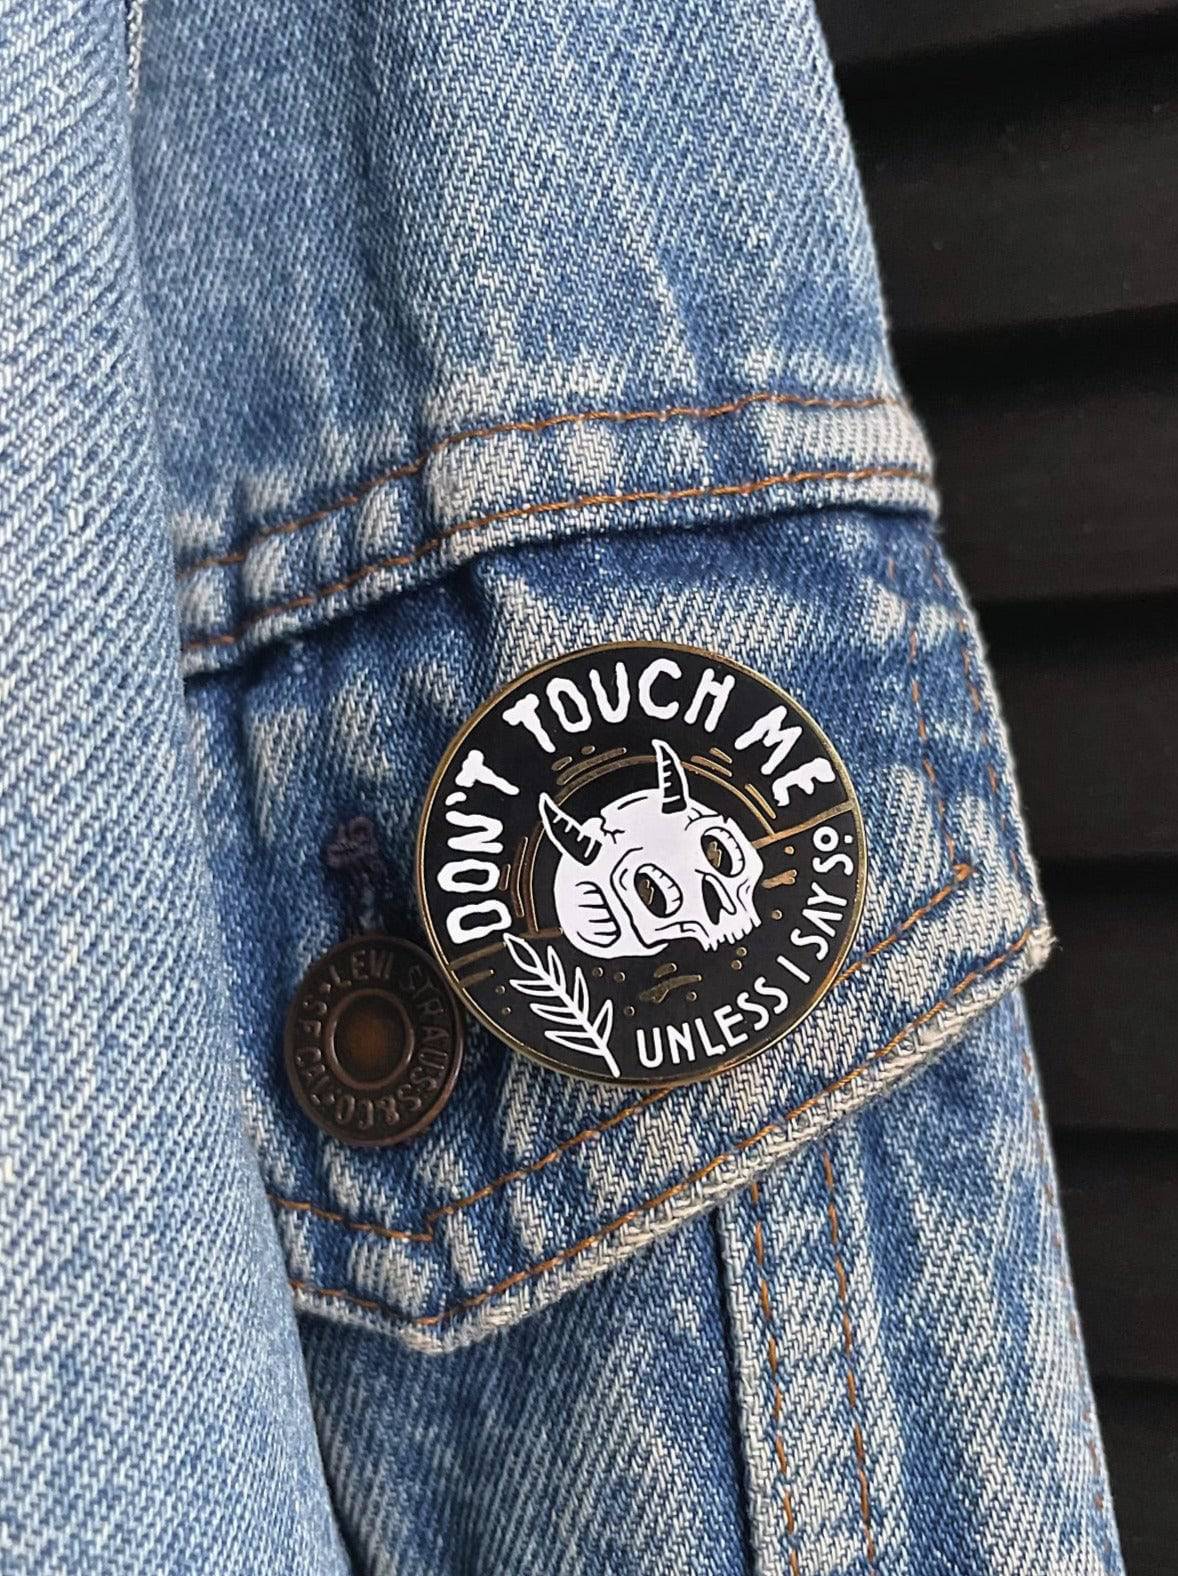 Don’t Touch Me Enamel Pin - Octopied Mind